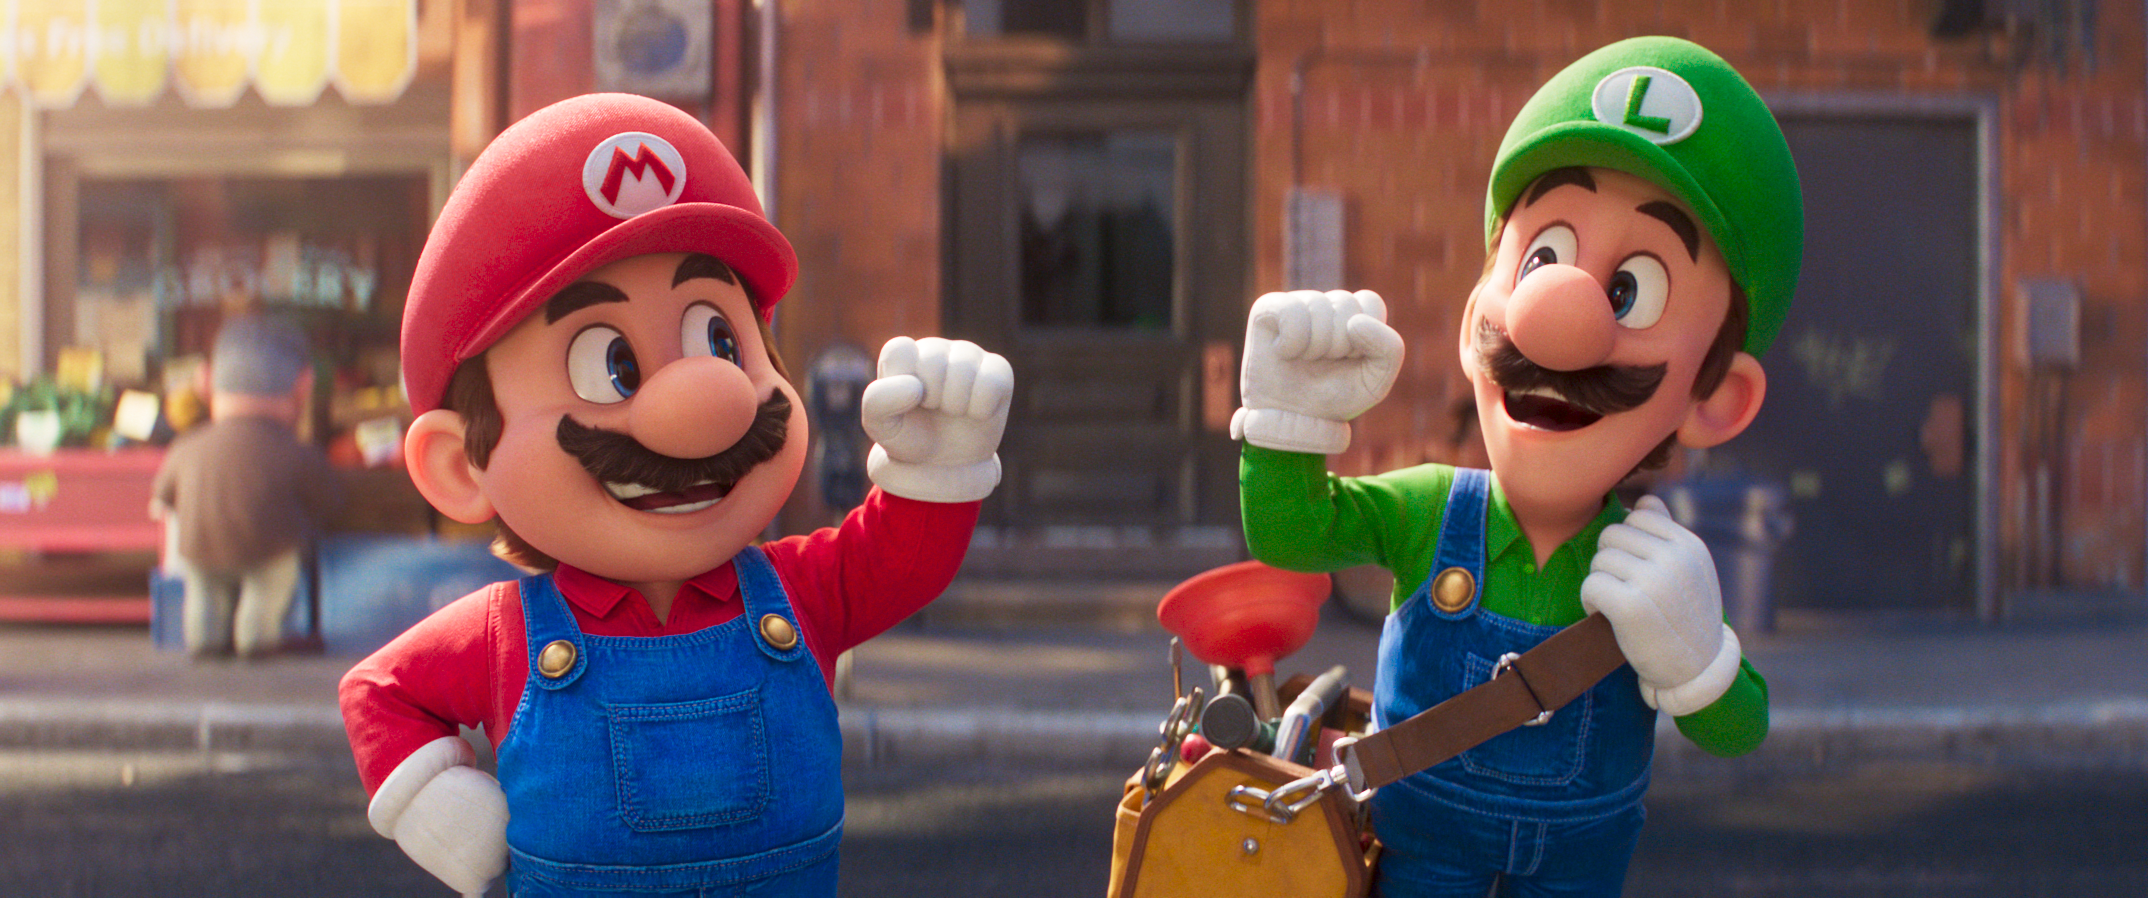 #FIRSTLOOK: NEW POSTER FOR “THE SUPER MARIO BROS MOVIE”